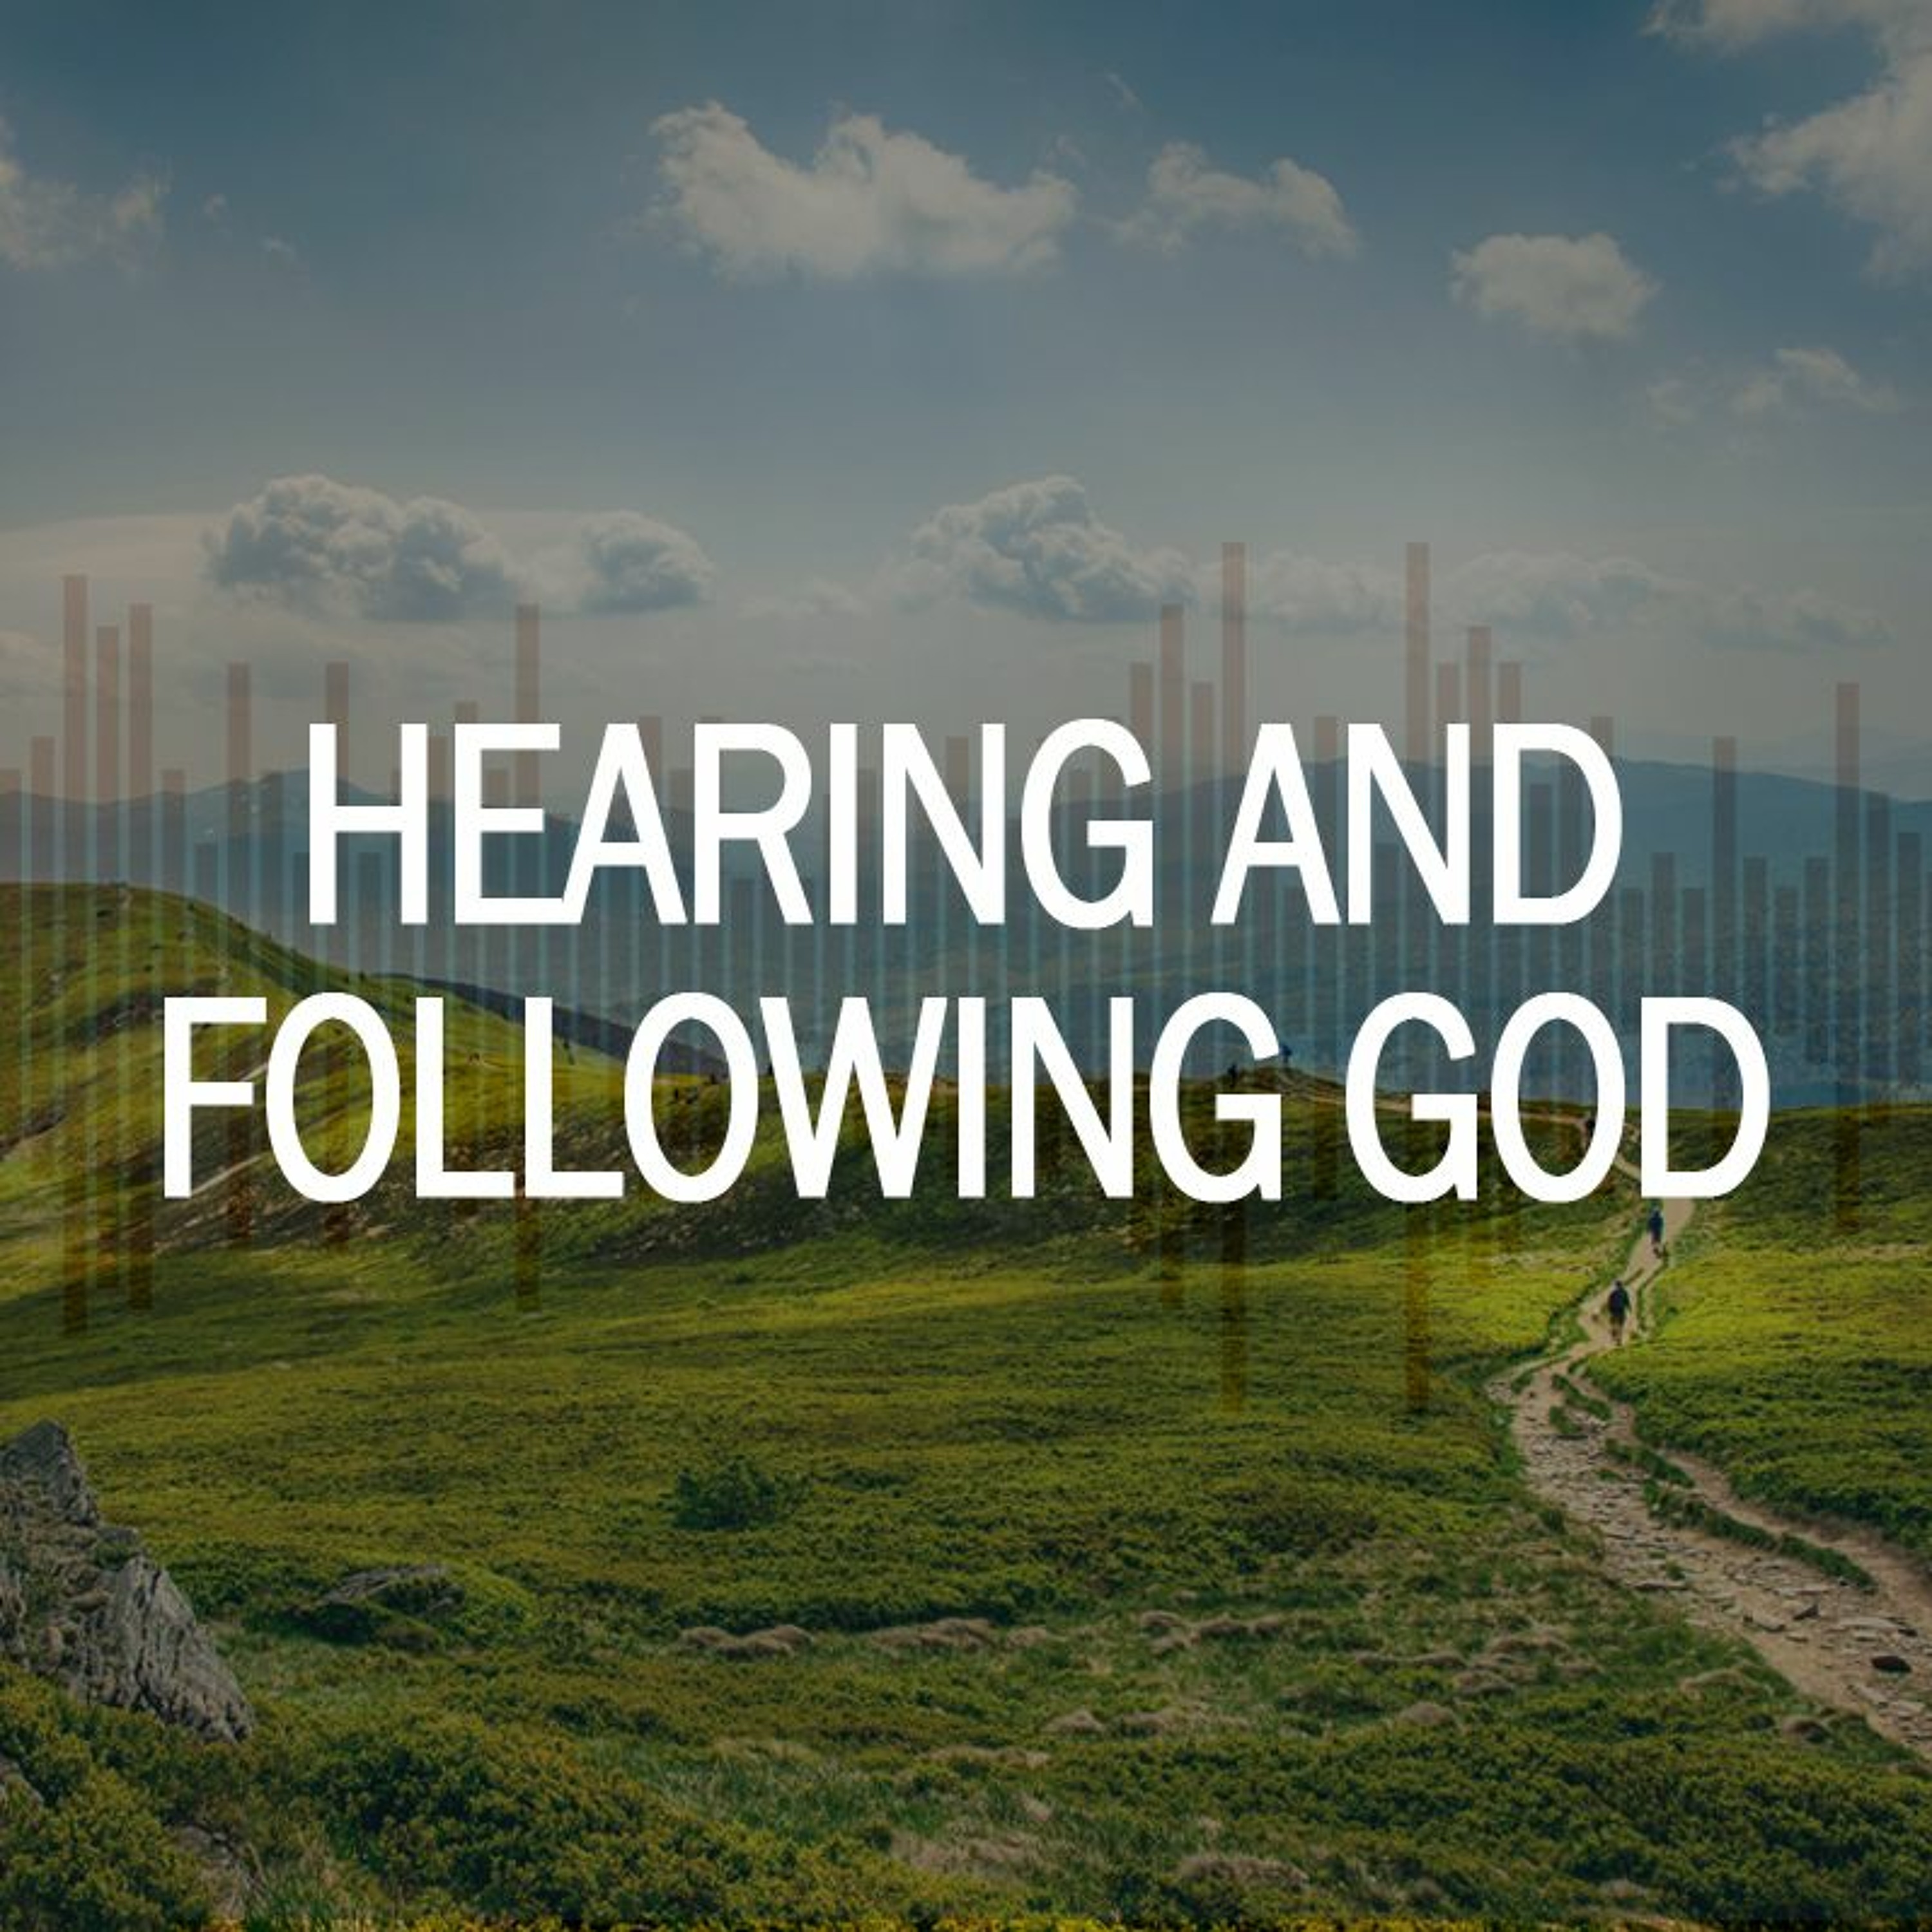 Hearing and following God | Singing about an upside down kingdom